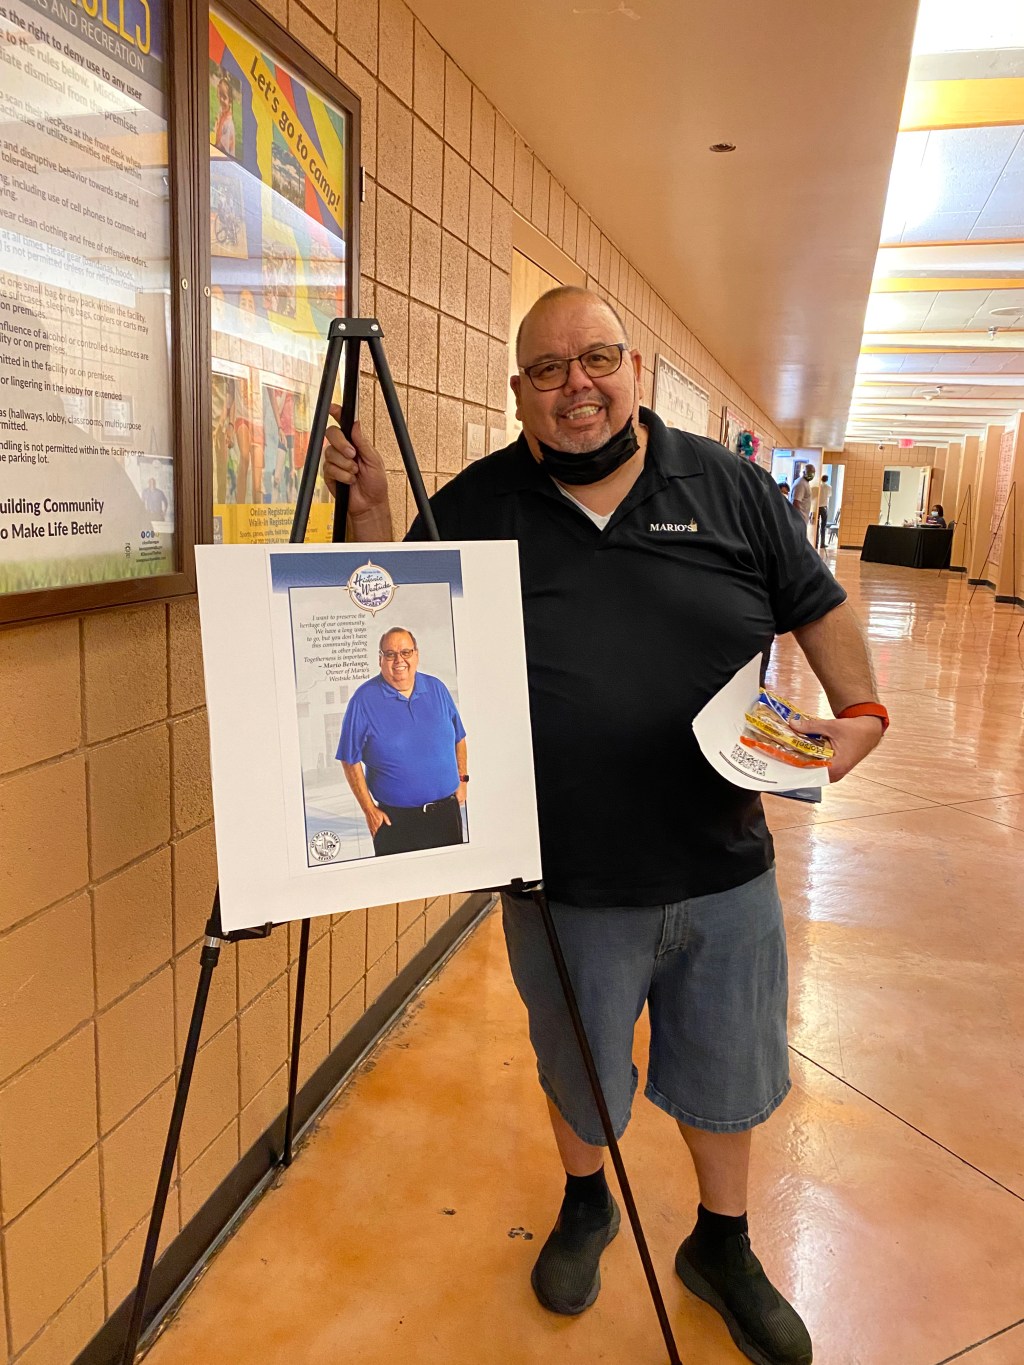 Mario Berlanga Jr. stands smiling next to a poster of himself quoted on the importance of businesses that are by and for the community.